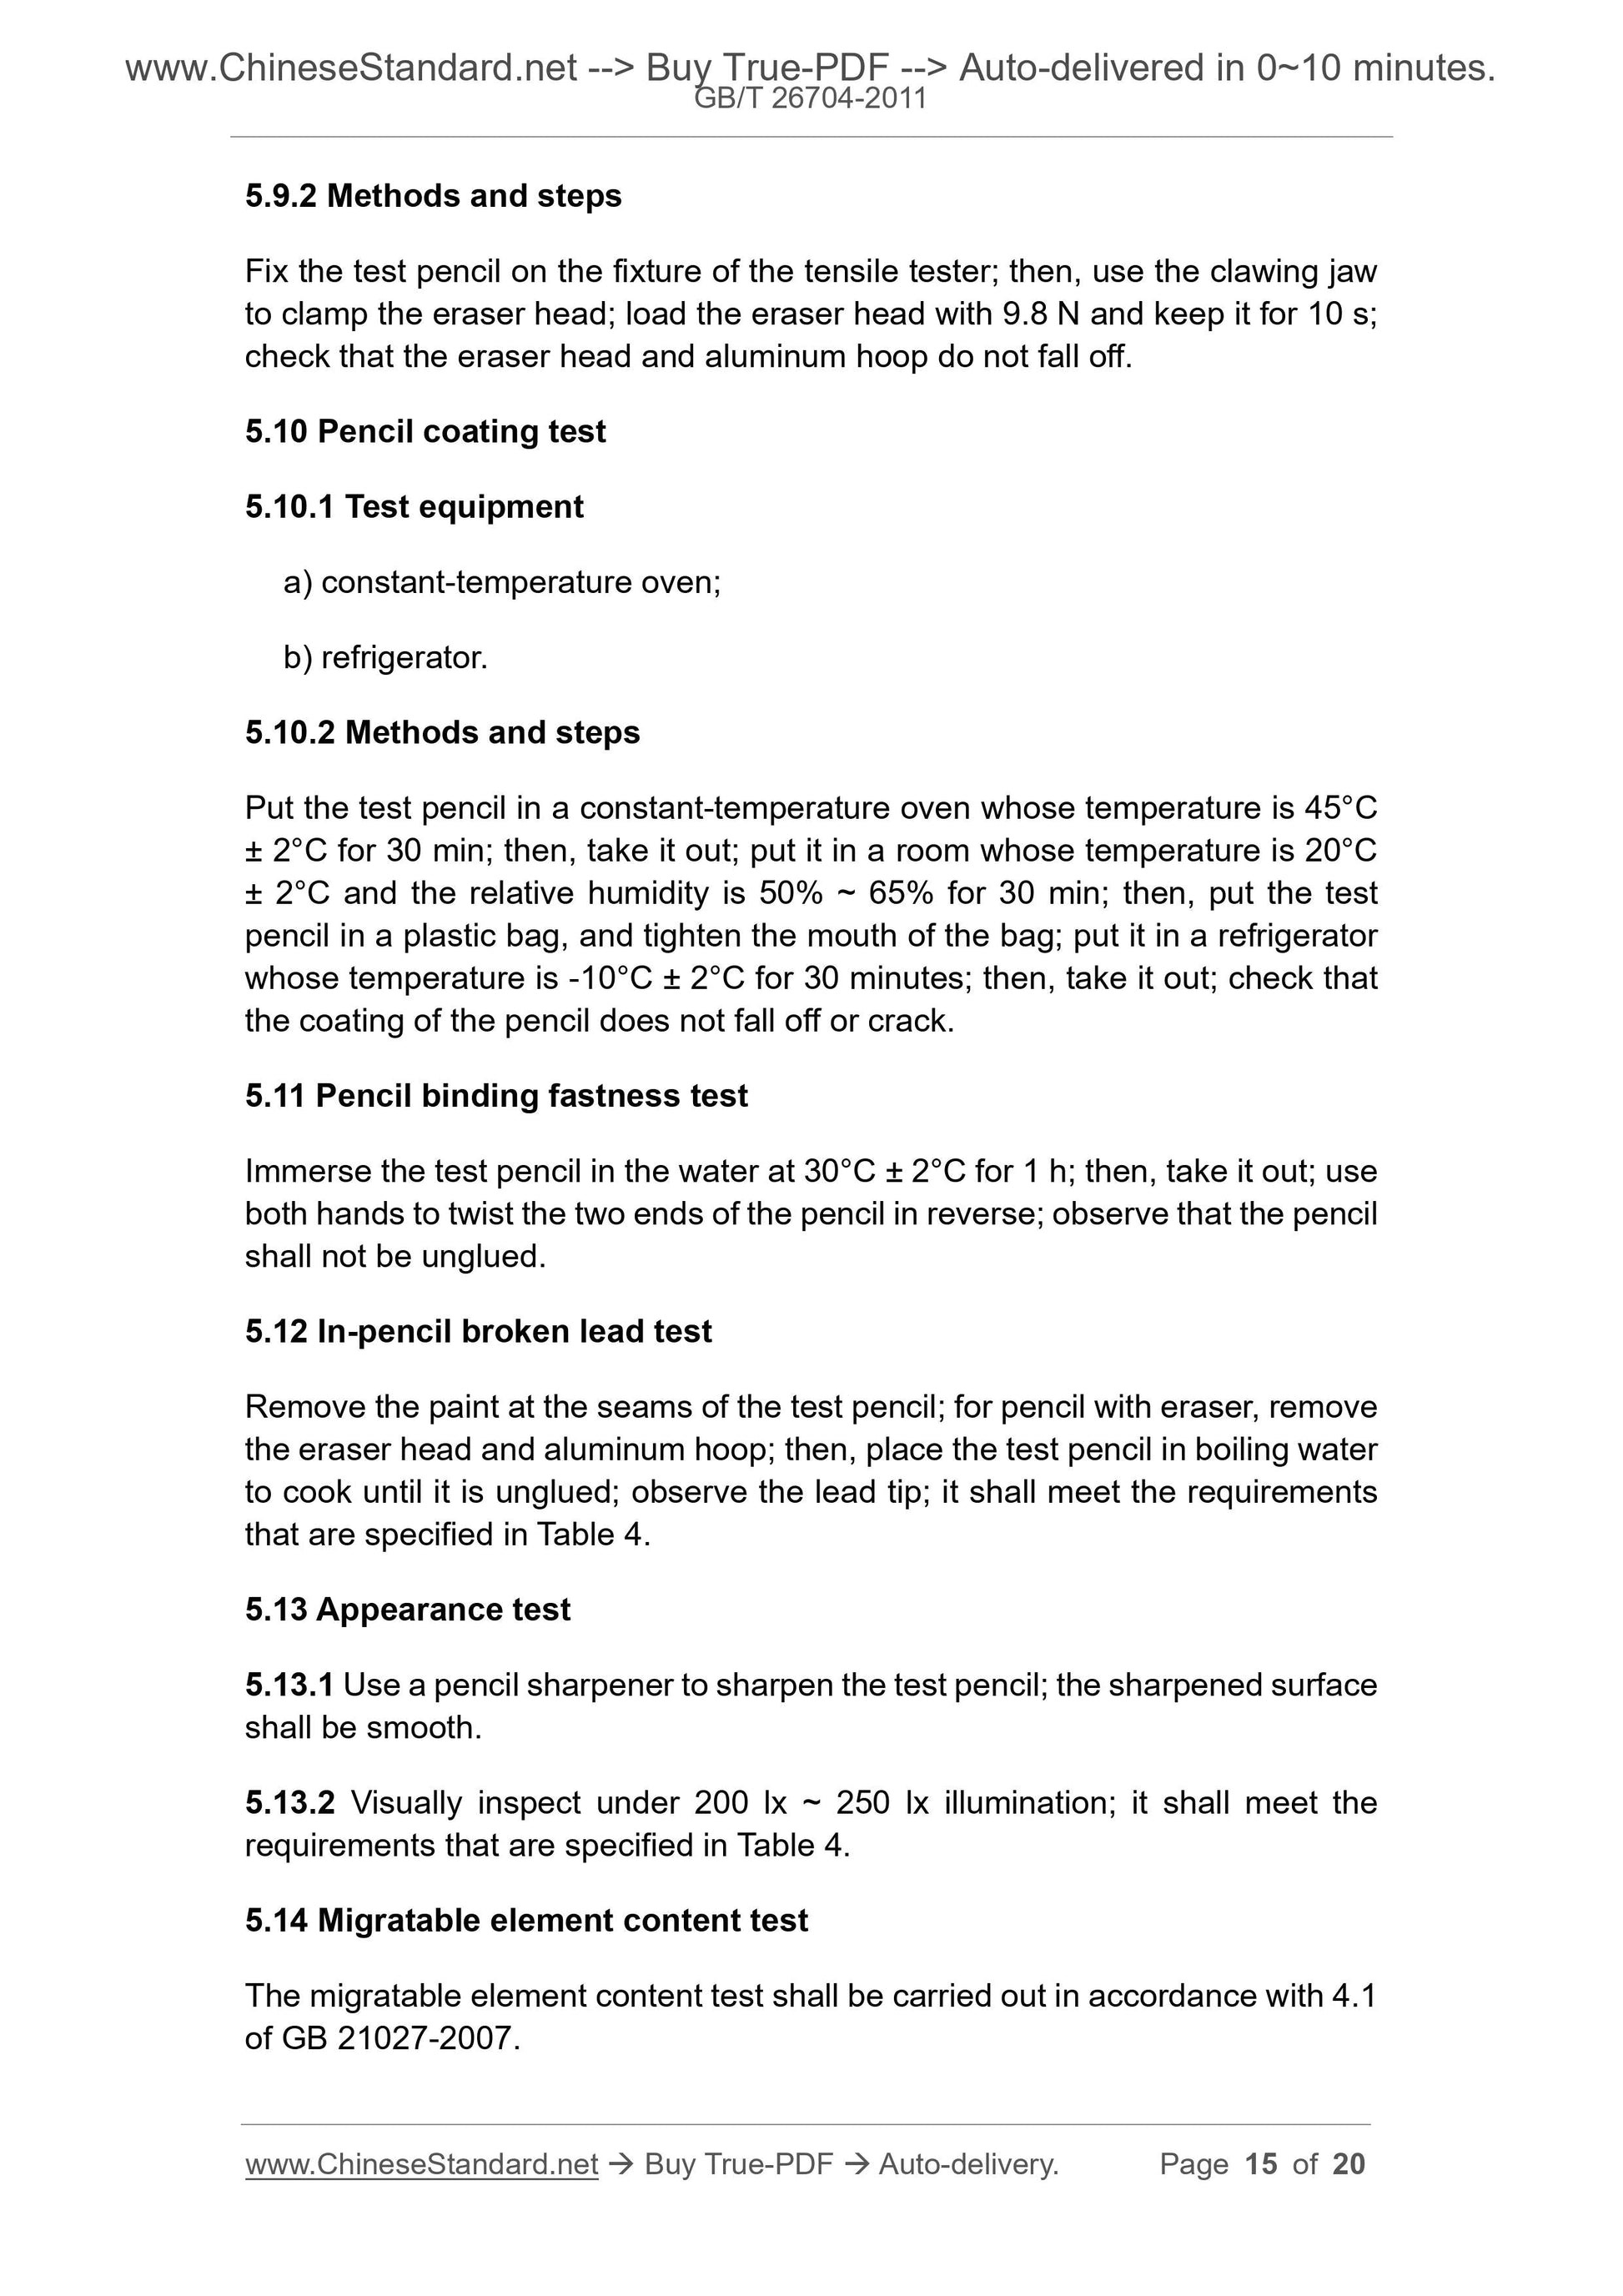 GB/T 26704-2011 Page 7